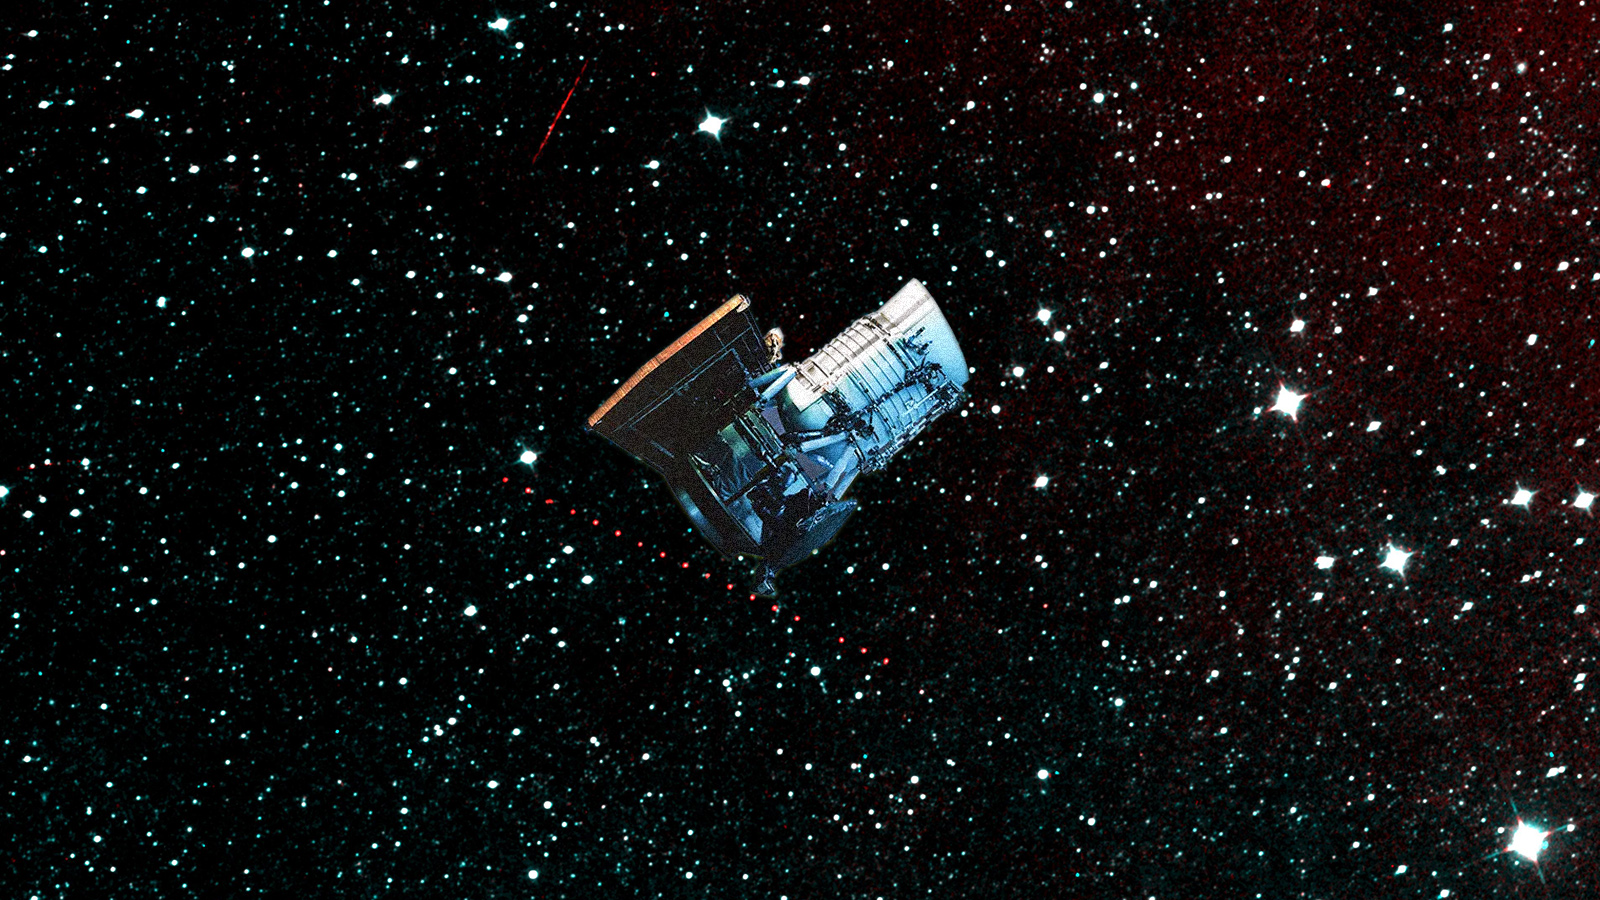 c 2020 f3 (neowise)